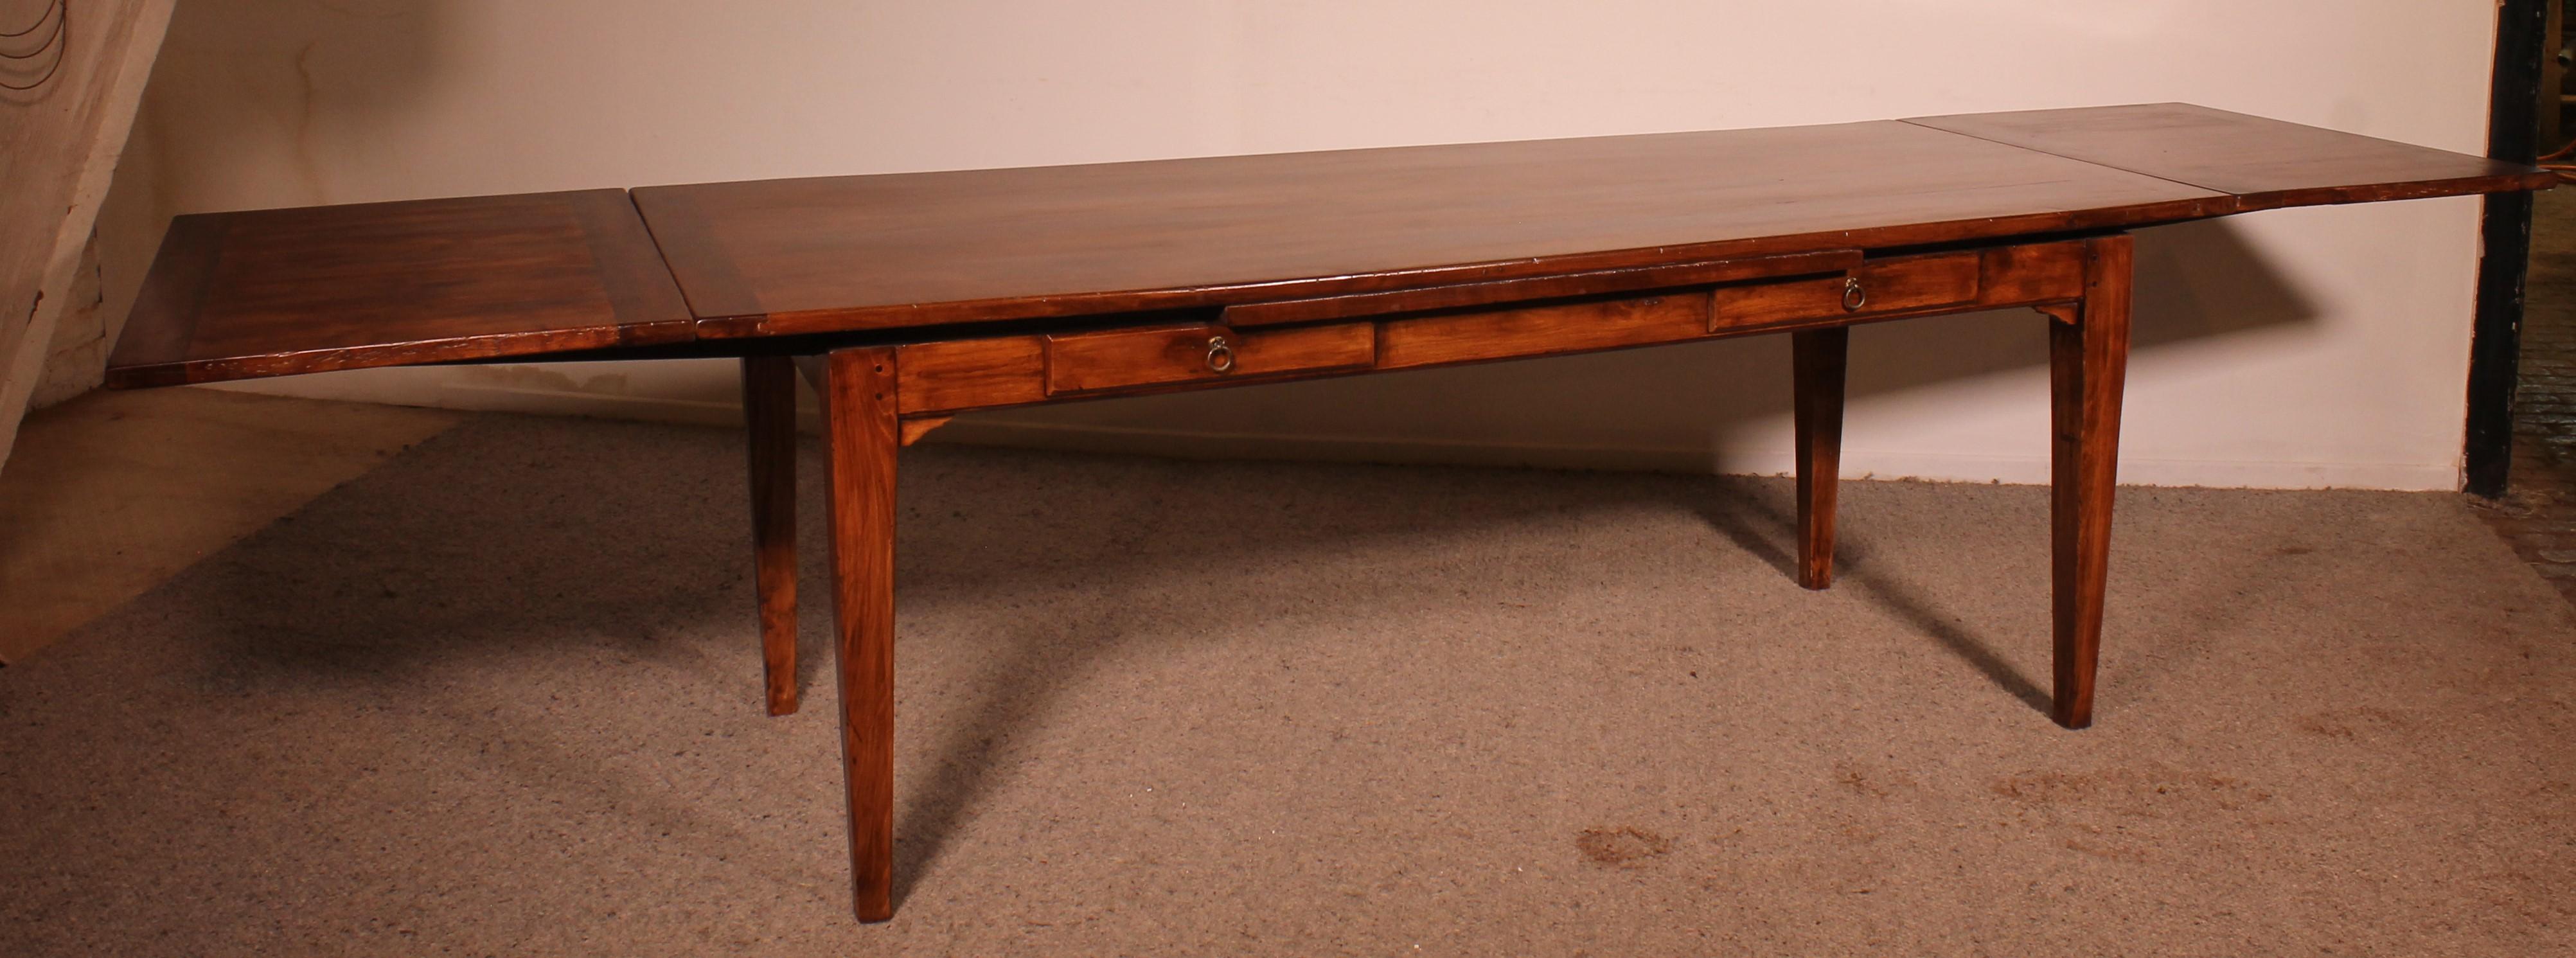 Extending Table In Cherrywood 19th Century-louis XVI Feet For Sale 5